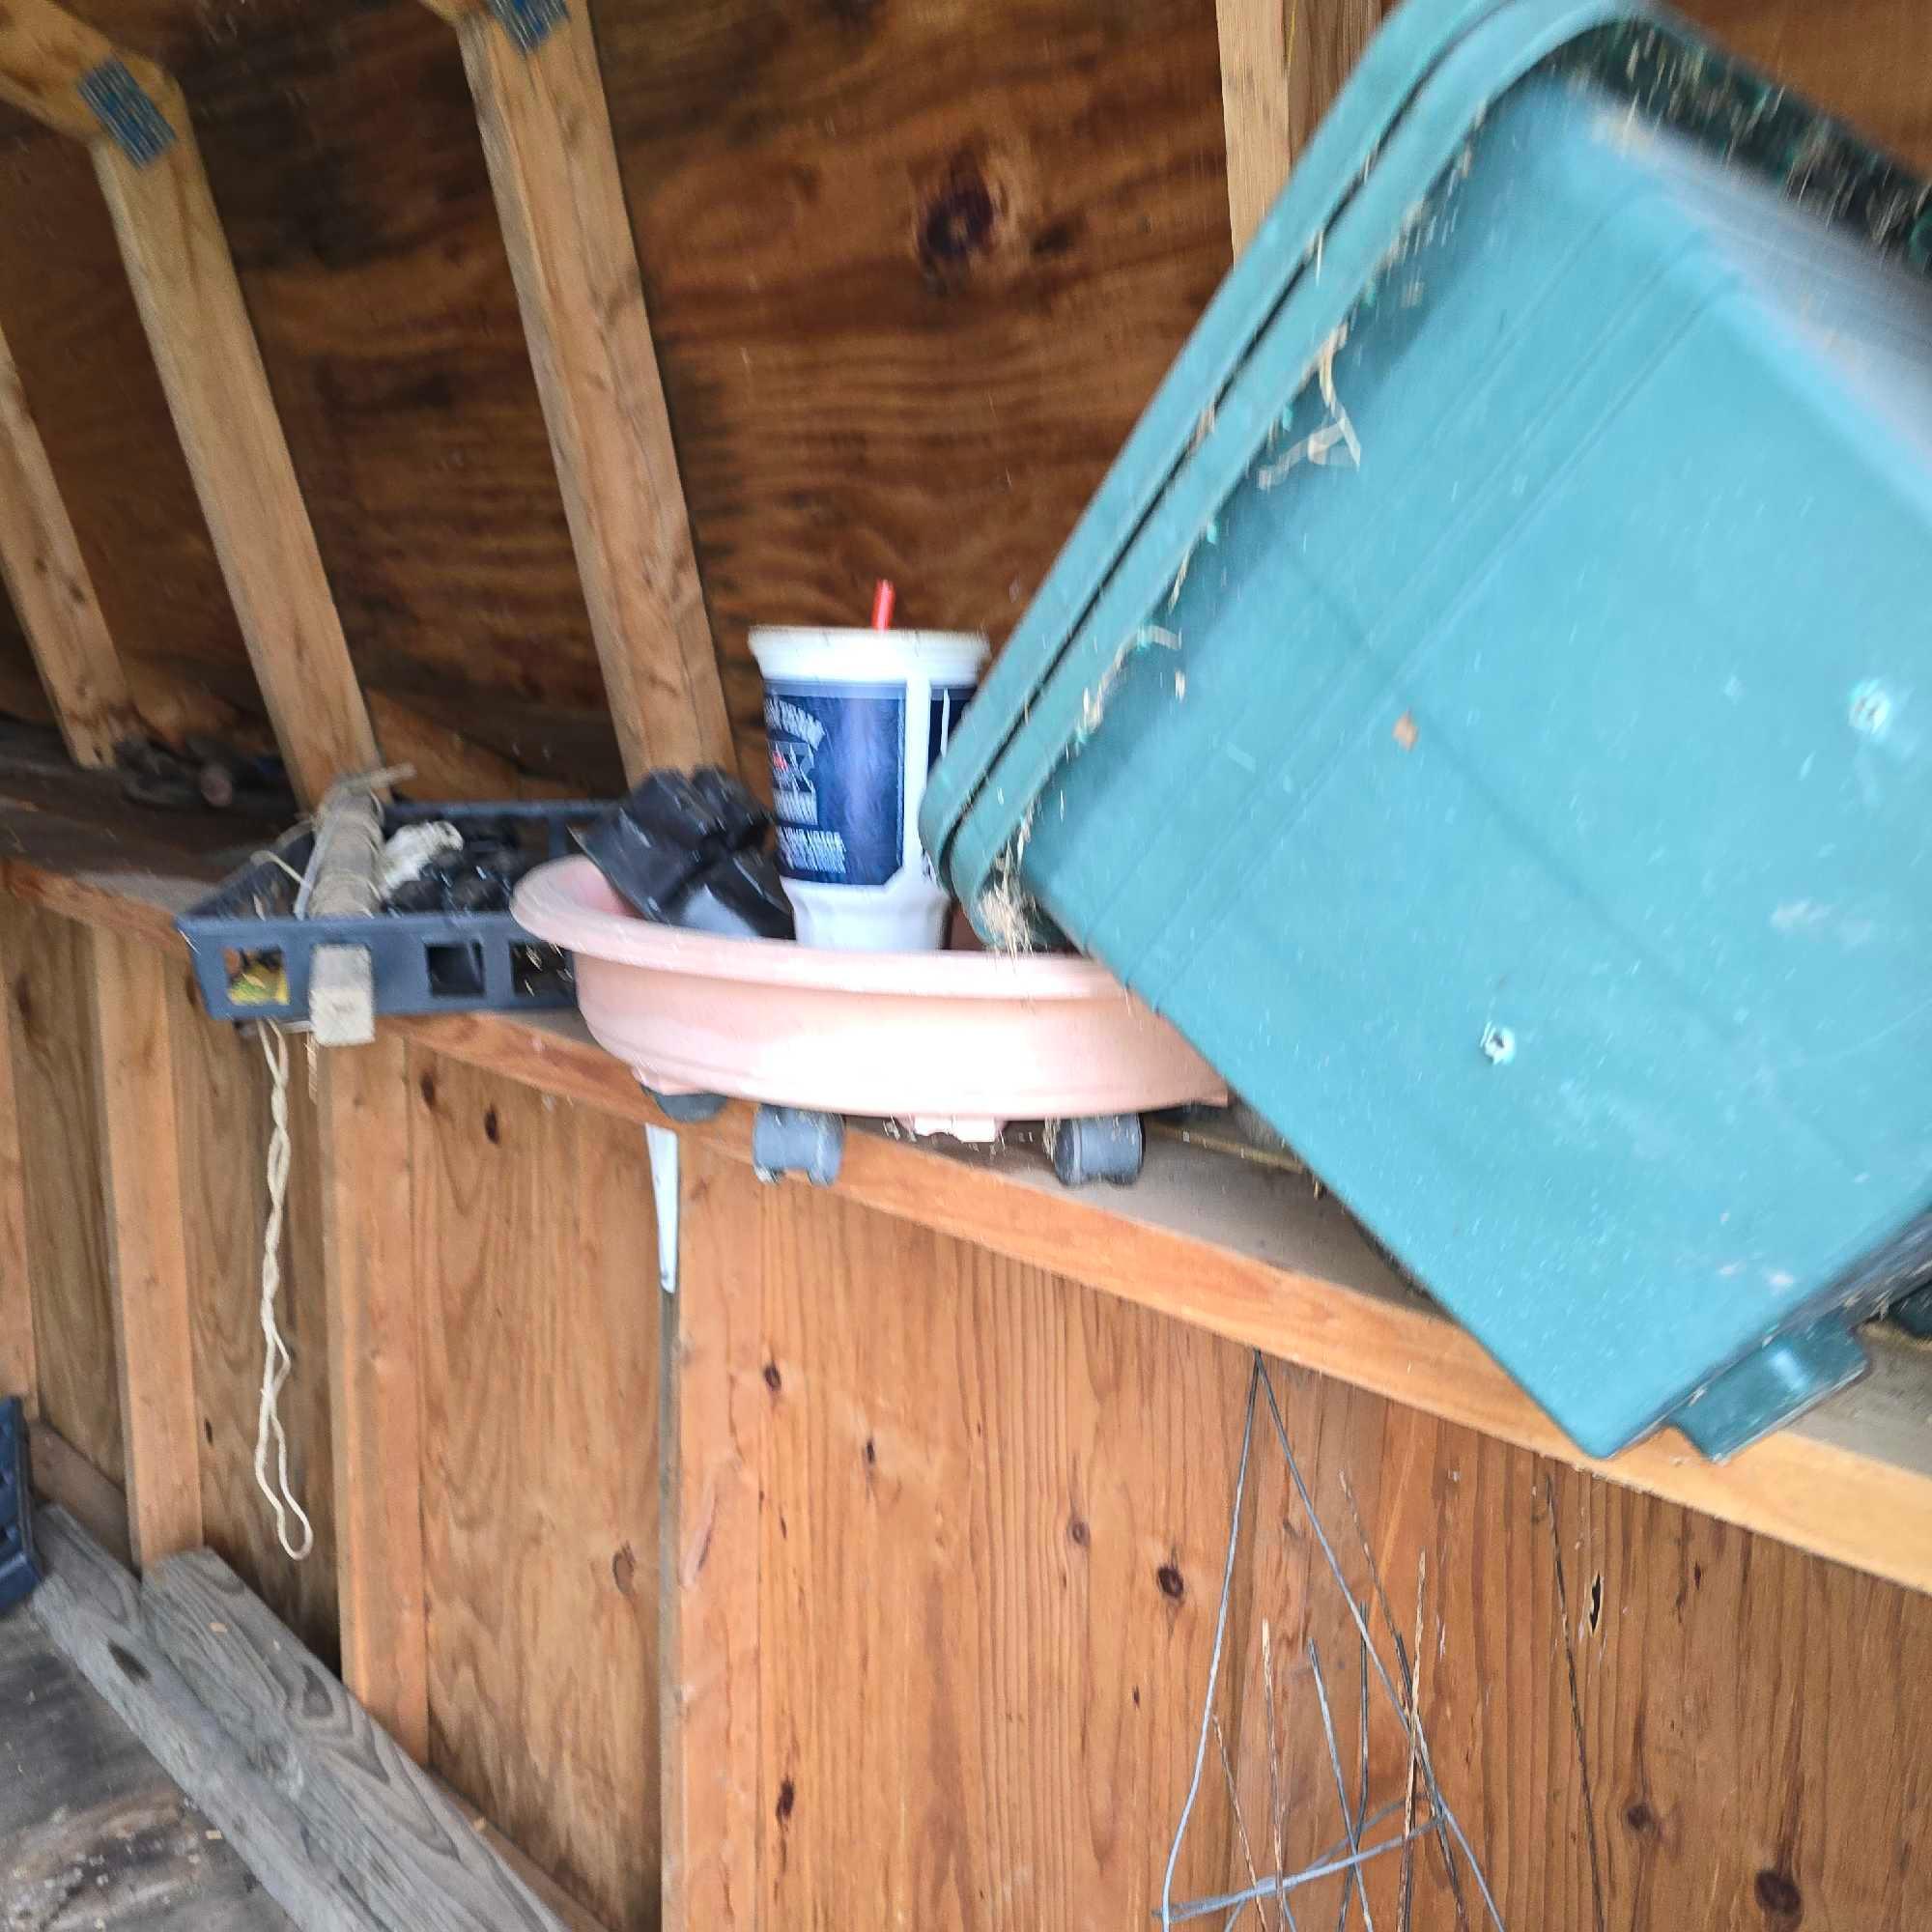 contents of two sheds. plastic and metal pipe - tubs and planters - hardware - lawn tool stand -